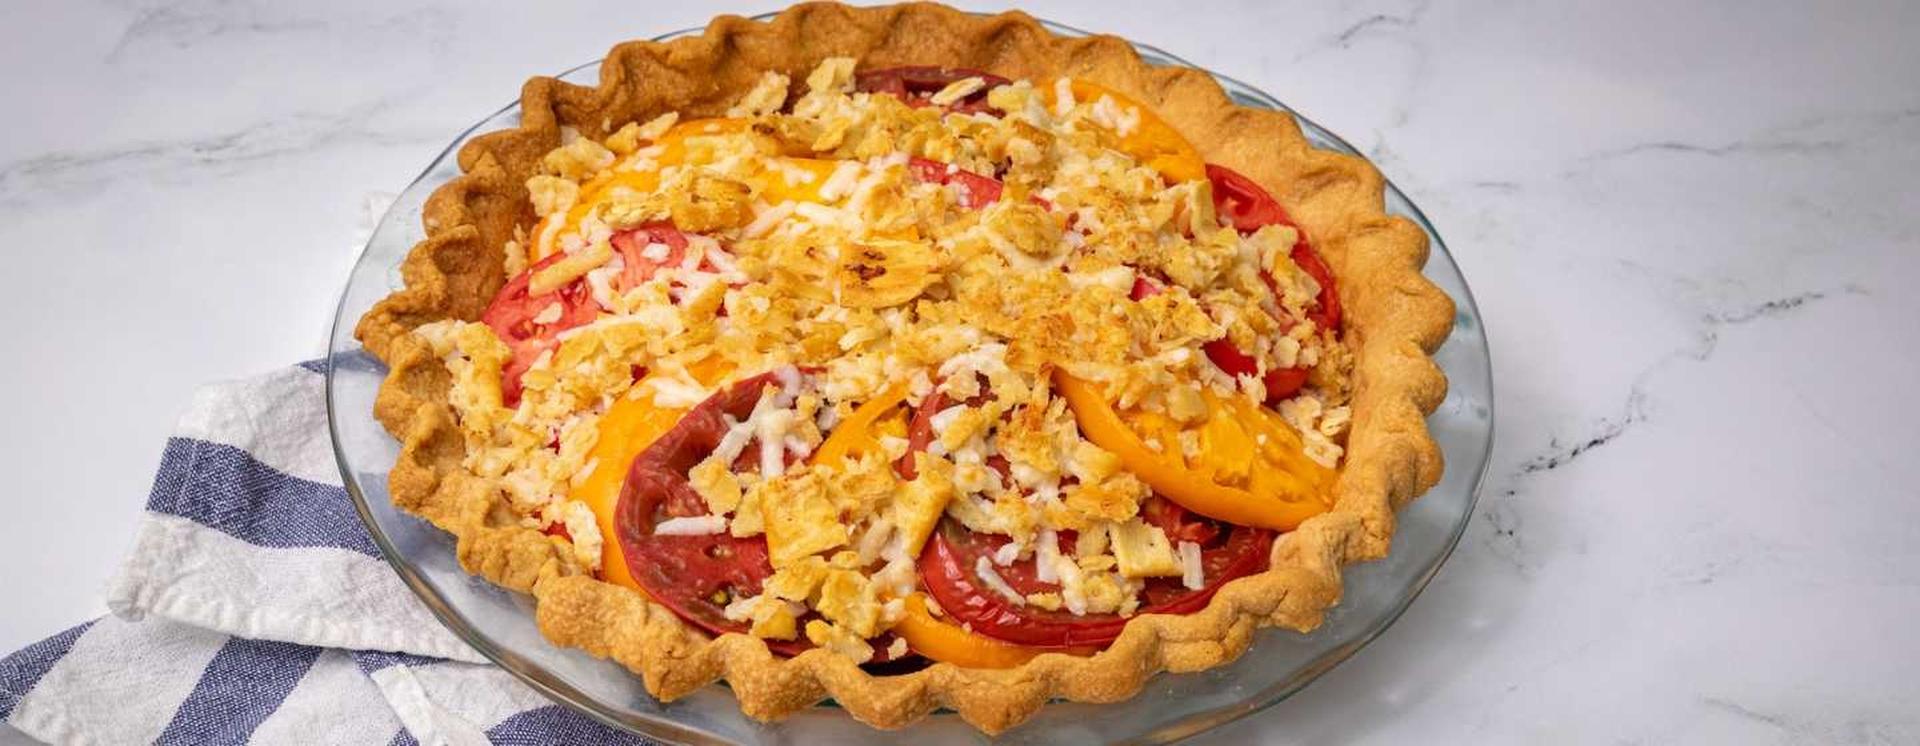 Savory Summertime Tomato Pie | The Key Ingredient with Sheri Castle